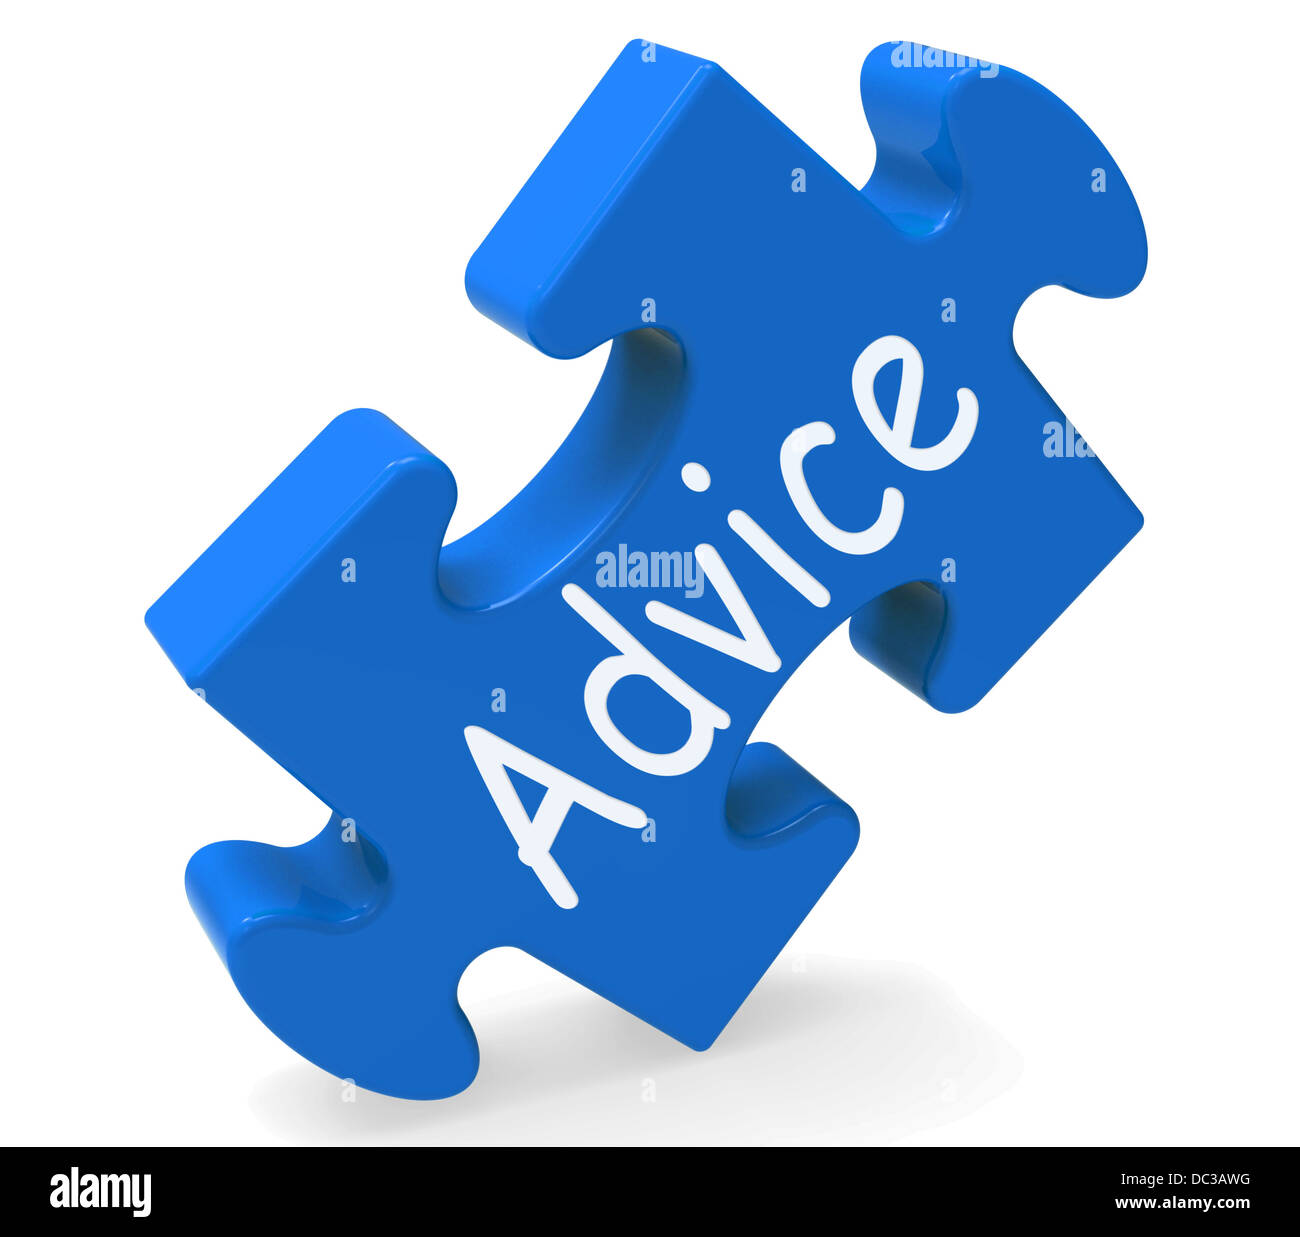 Advice Shows Support Help And Assistance Stock Photo